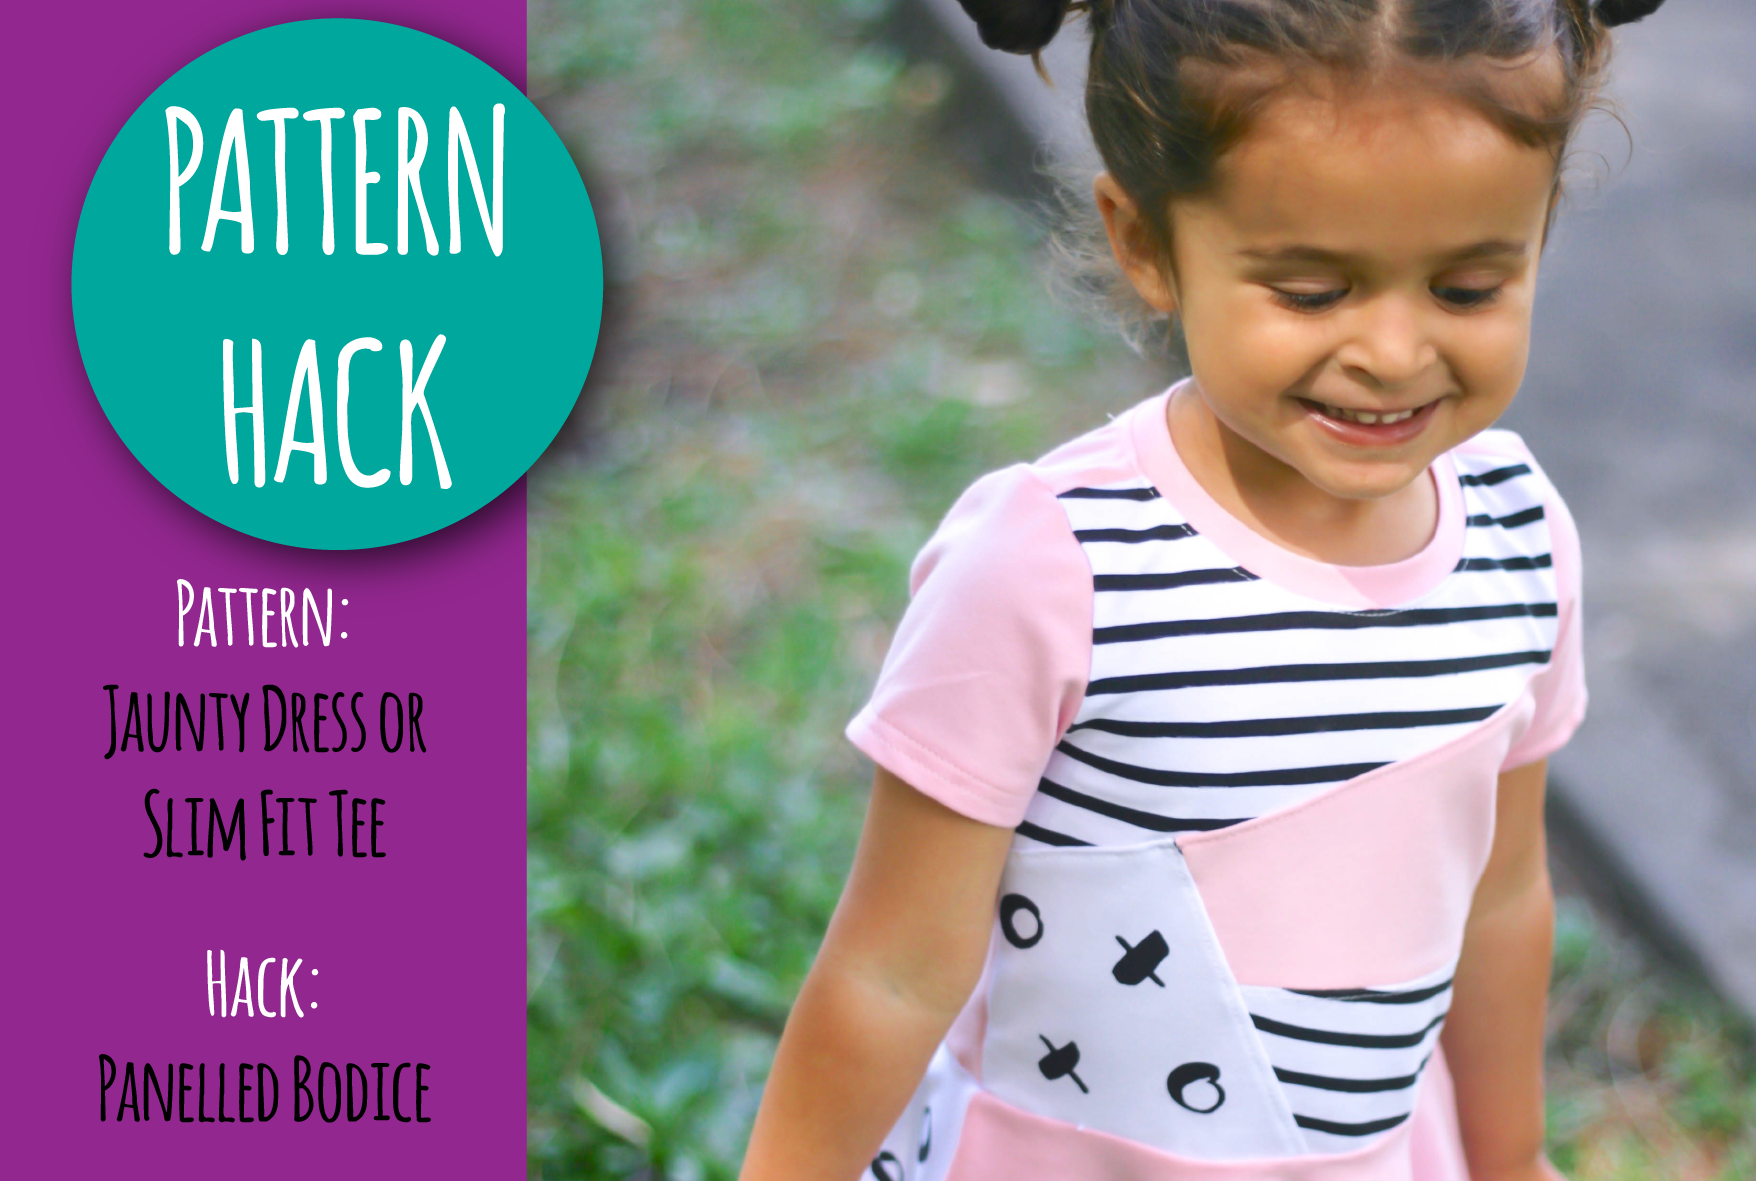 PATTERN HACK - Panelled bodice on any knit tee or dress